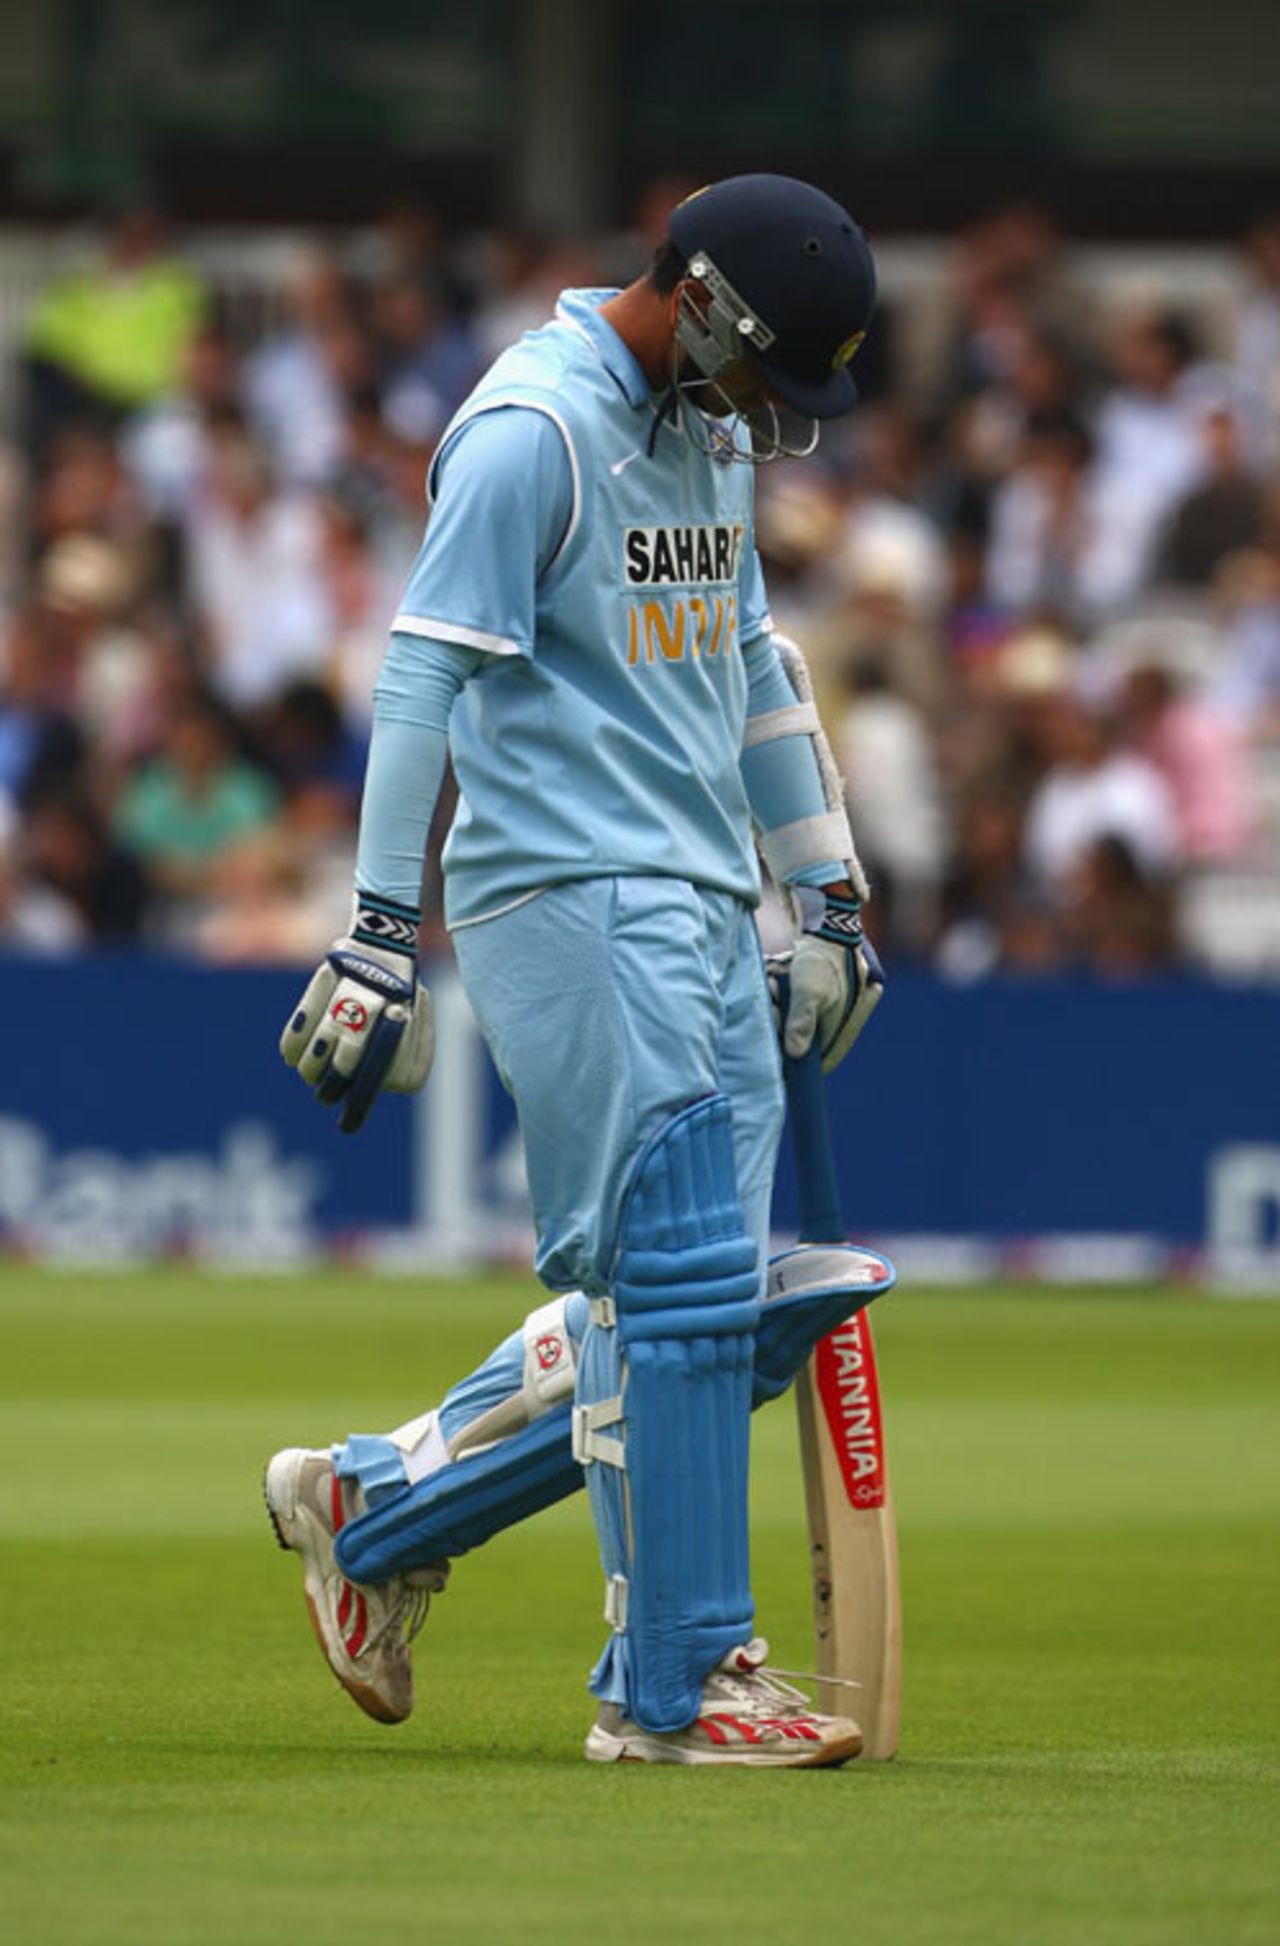 Rahul Dravid is a picture of dejection after his dismissal, England v India, 7th ODI, Lord's, September 8, 2007